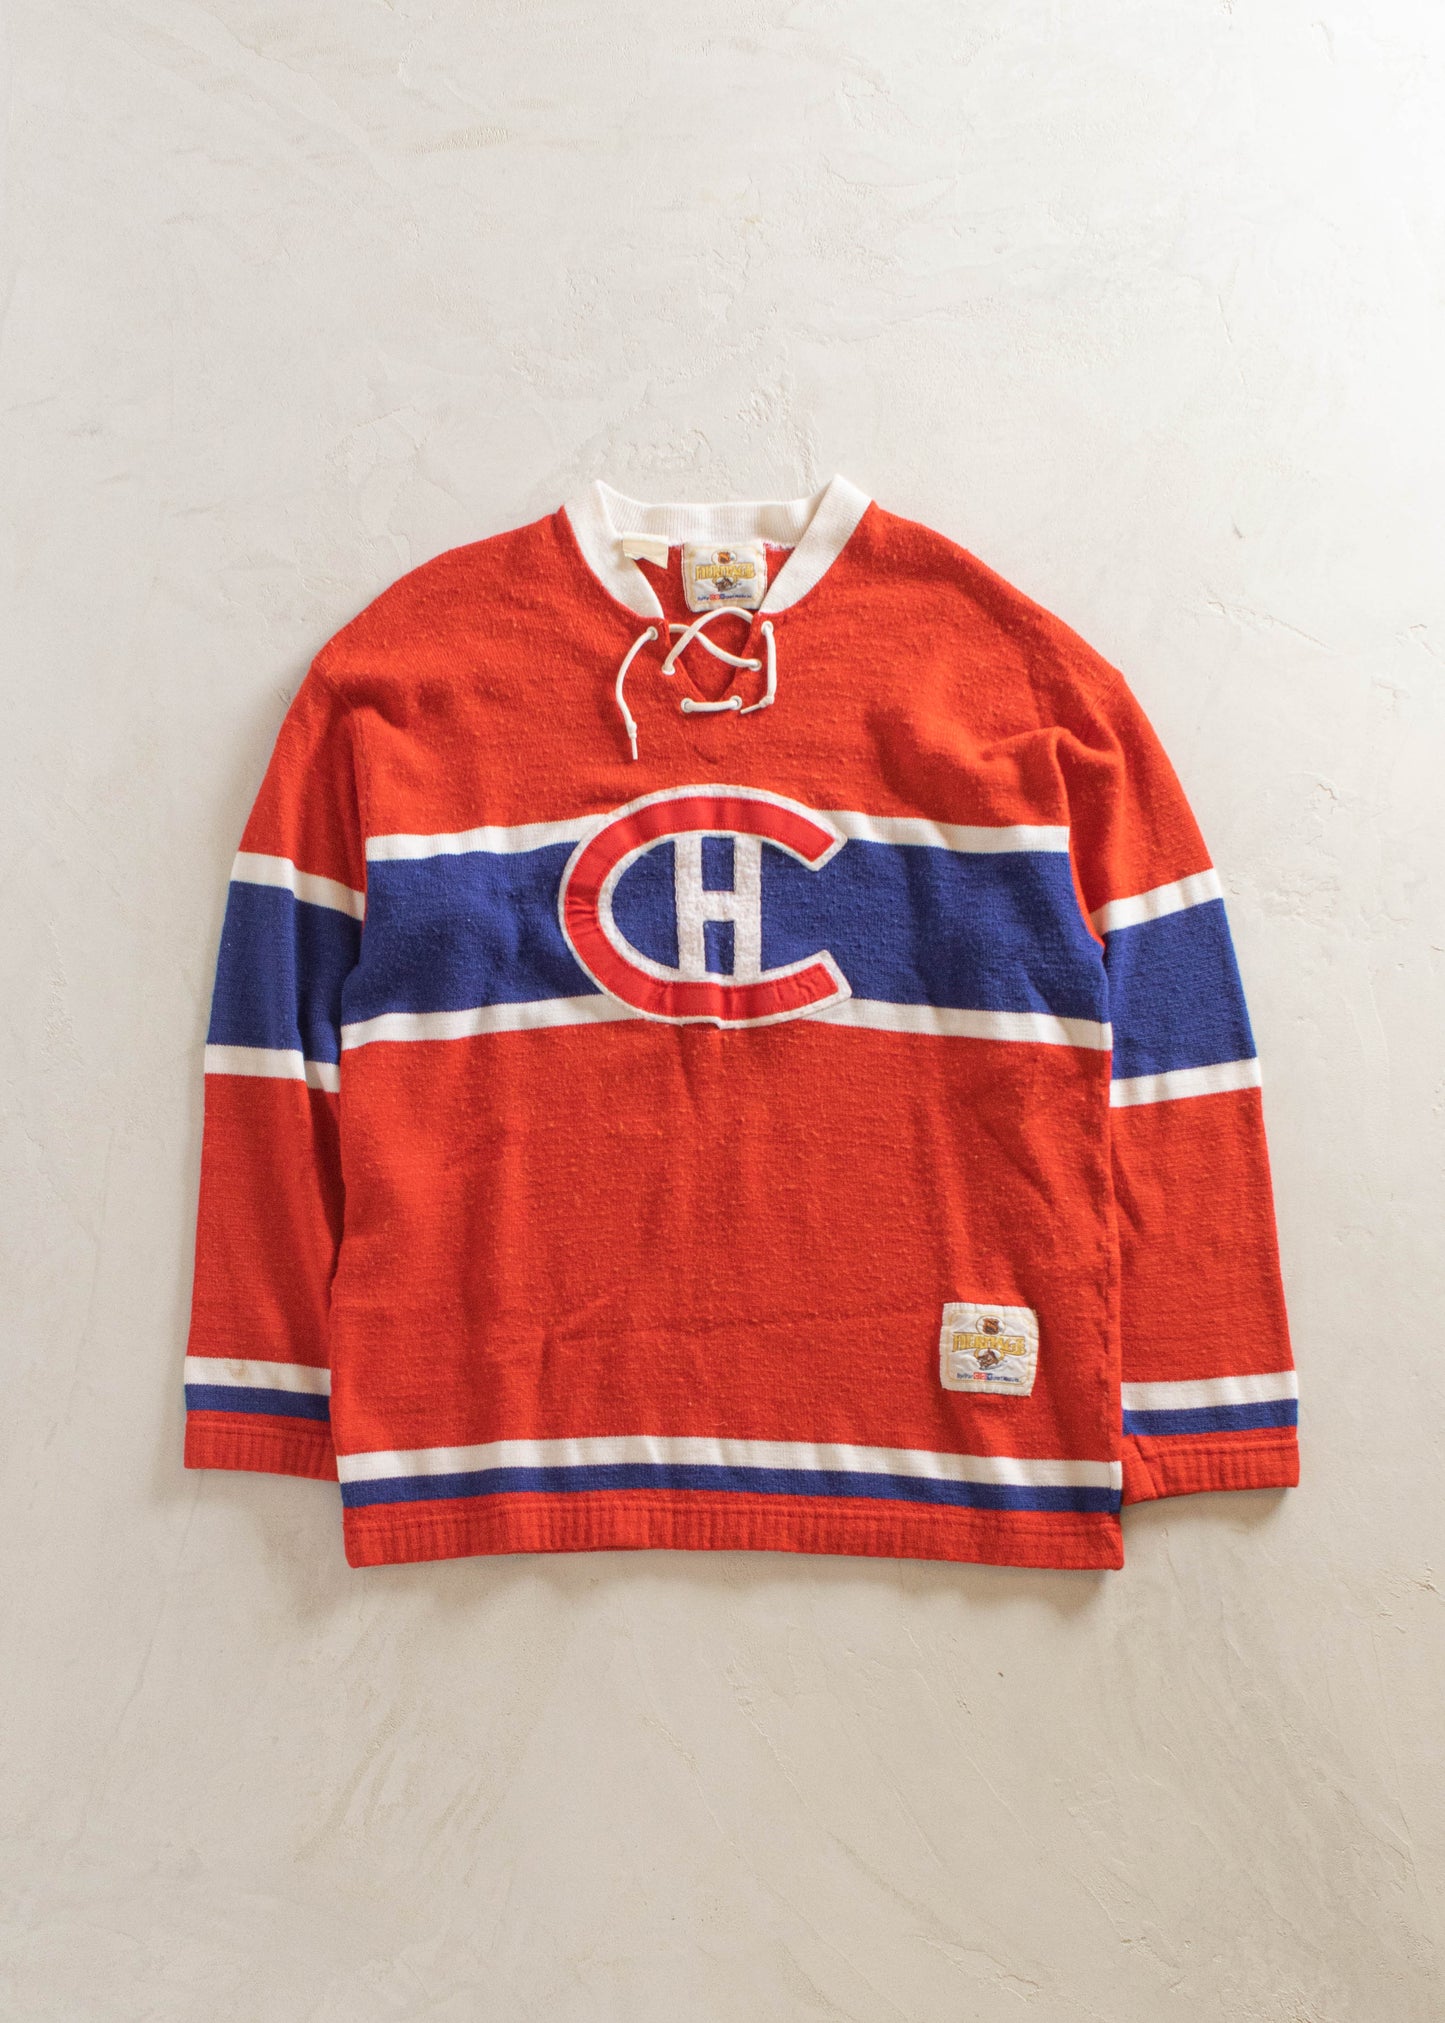 1980s CCM Montreal Canadians Canadian Hockey Sport Jersey Size M/L